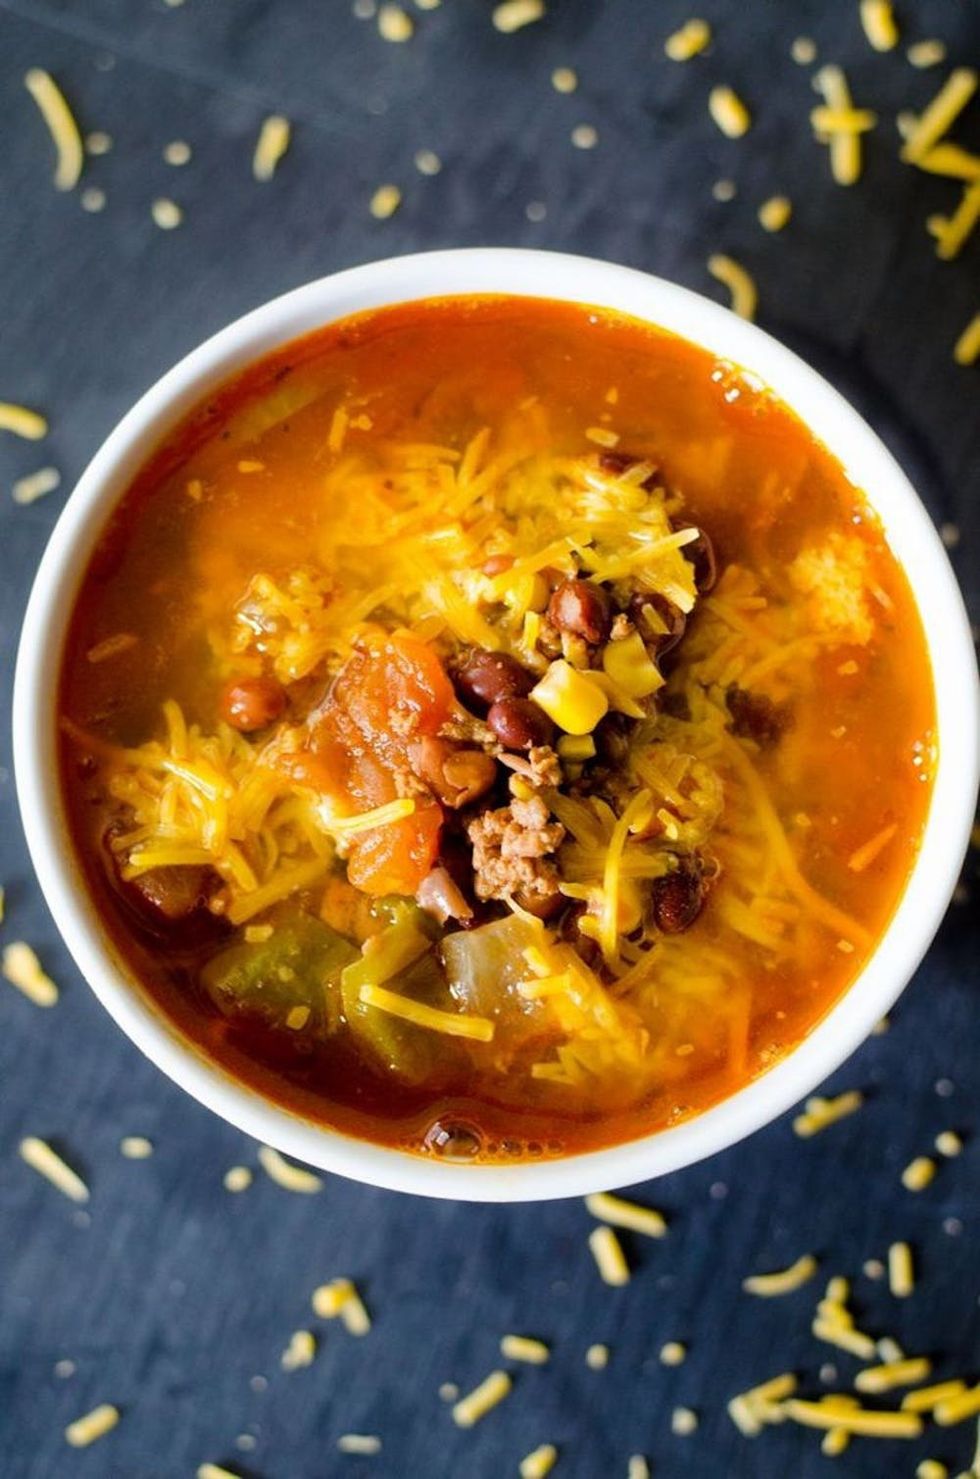 Load Up Your Thermos All Week Long With These 14 Instant Pot Soups - Brit +  Co